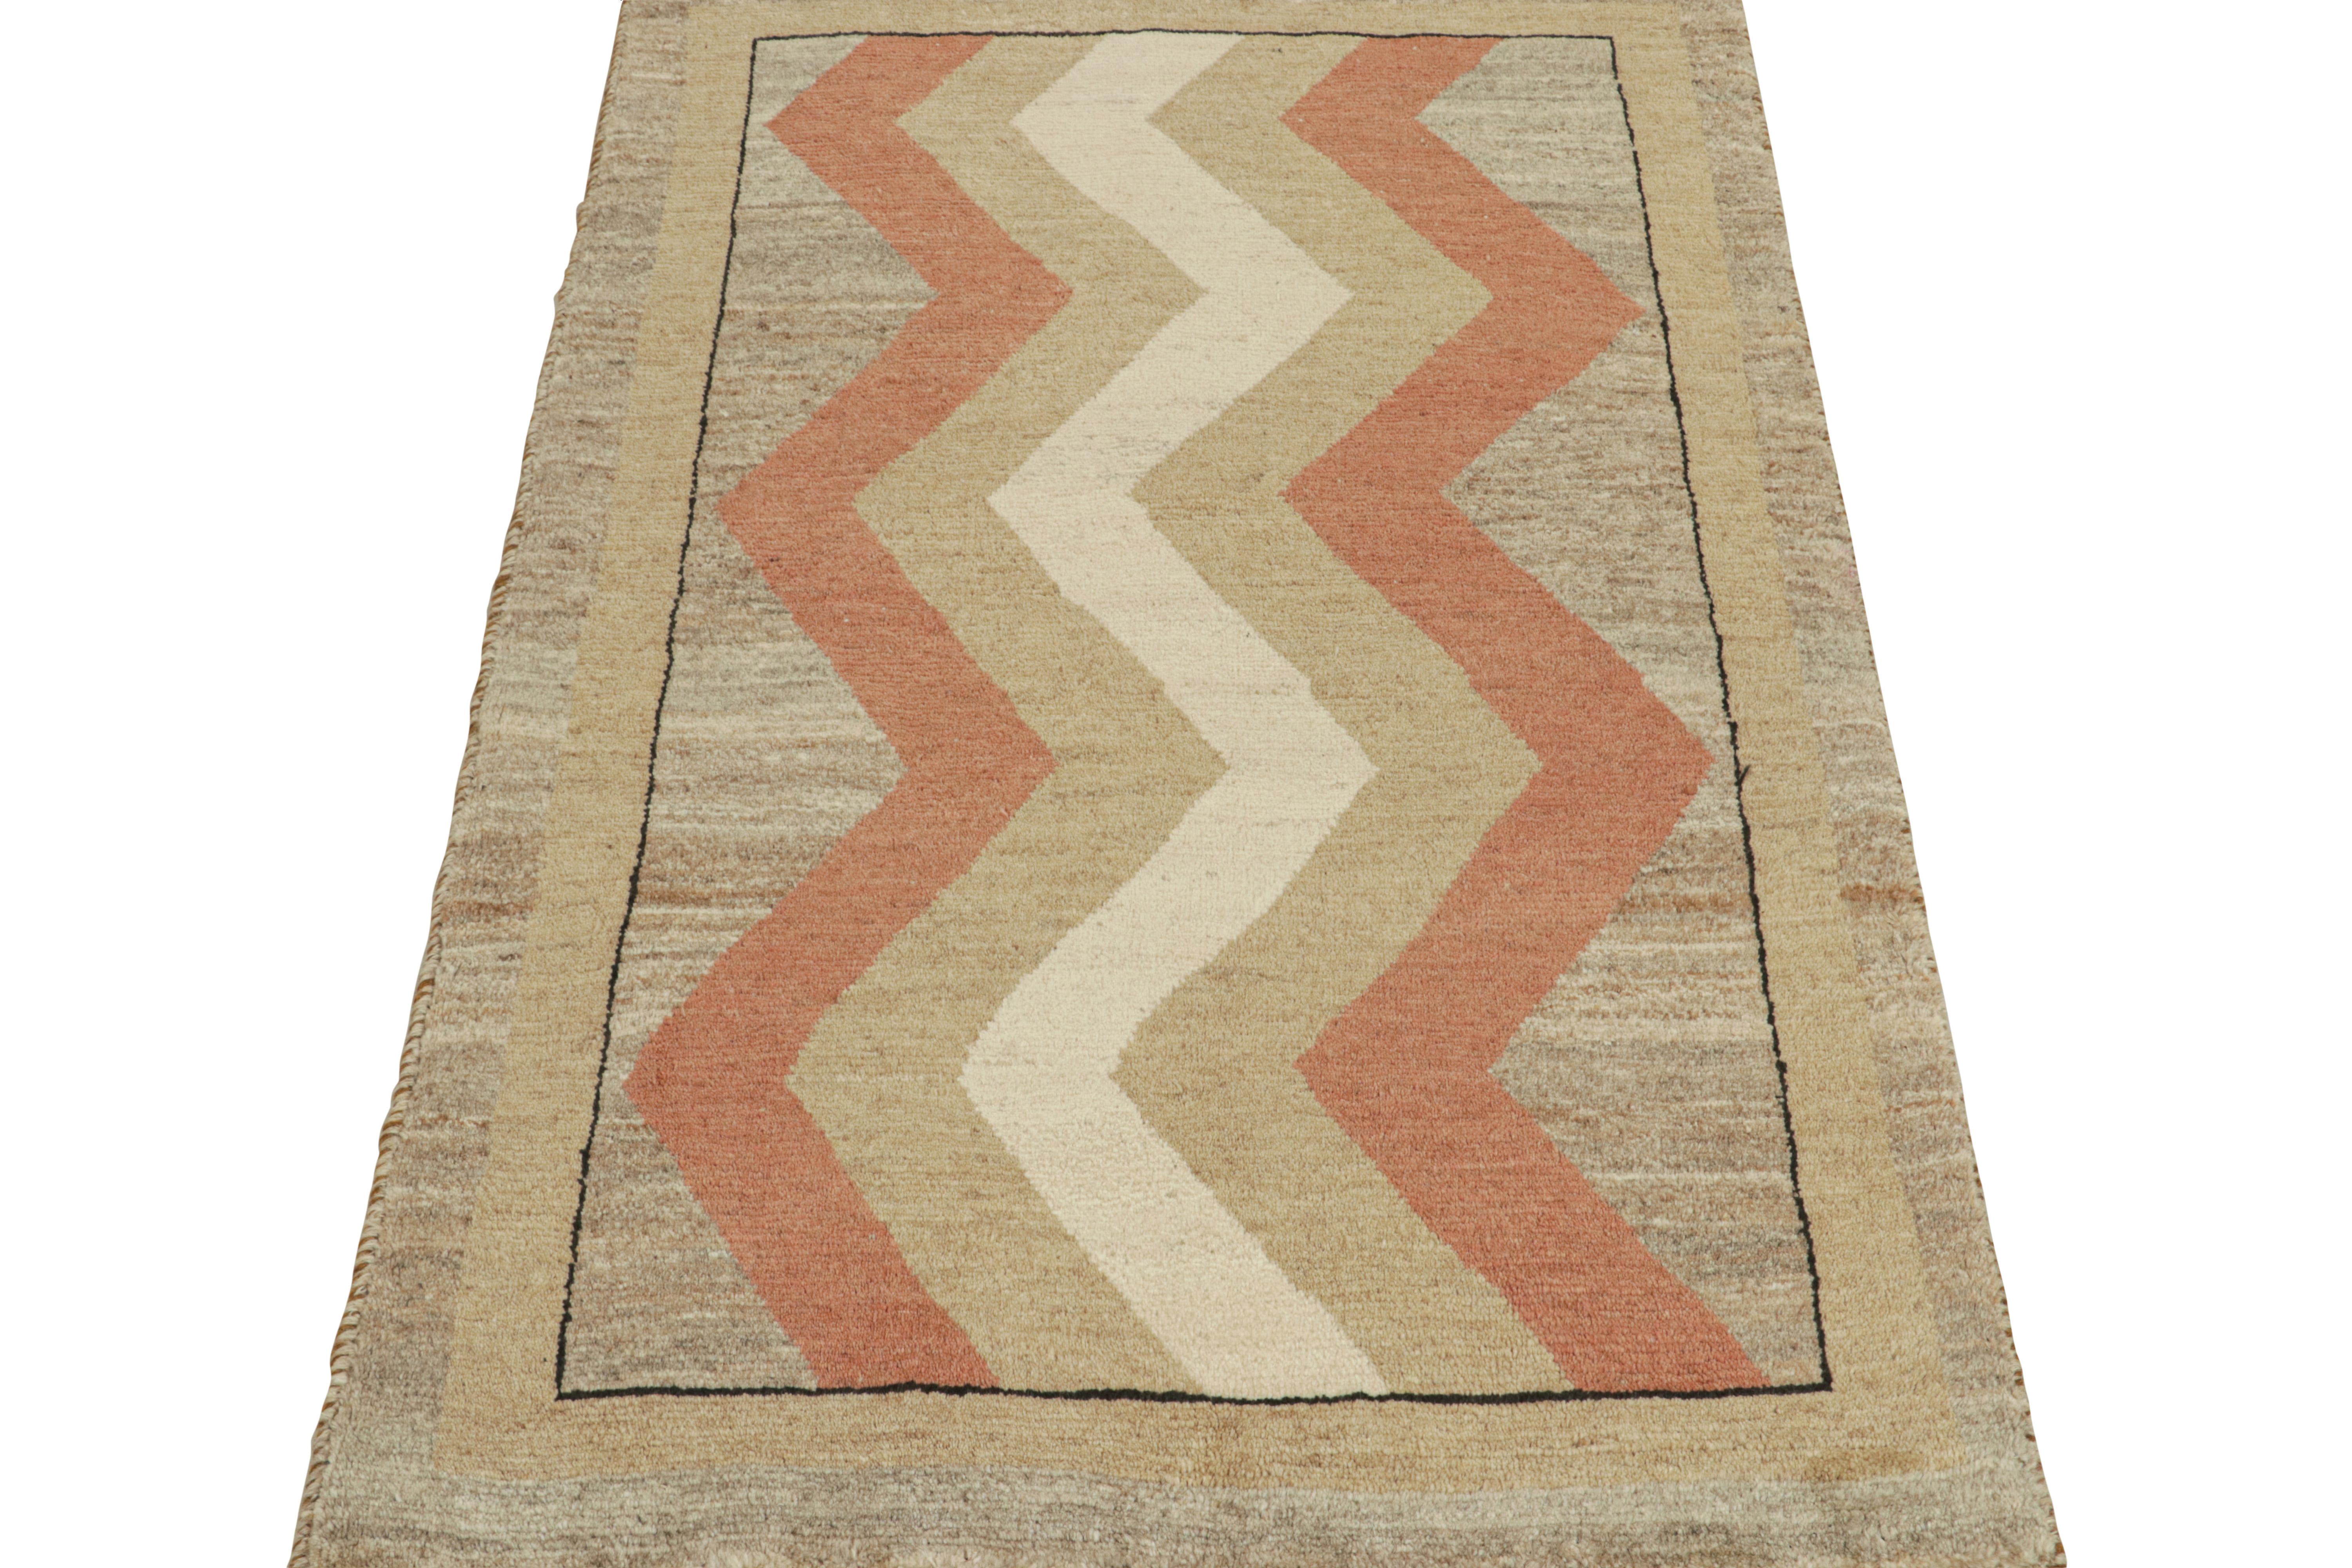 Tribal Vintage Gabbeh Rug in Beige-Brown and Red Chevron Patterns by Rug & Kilim For Sale